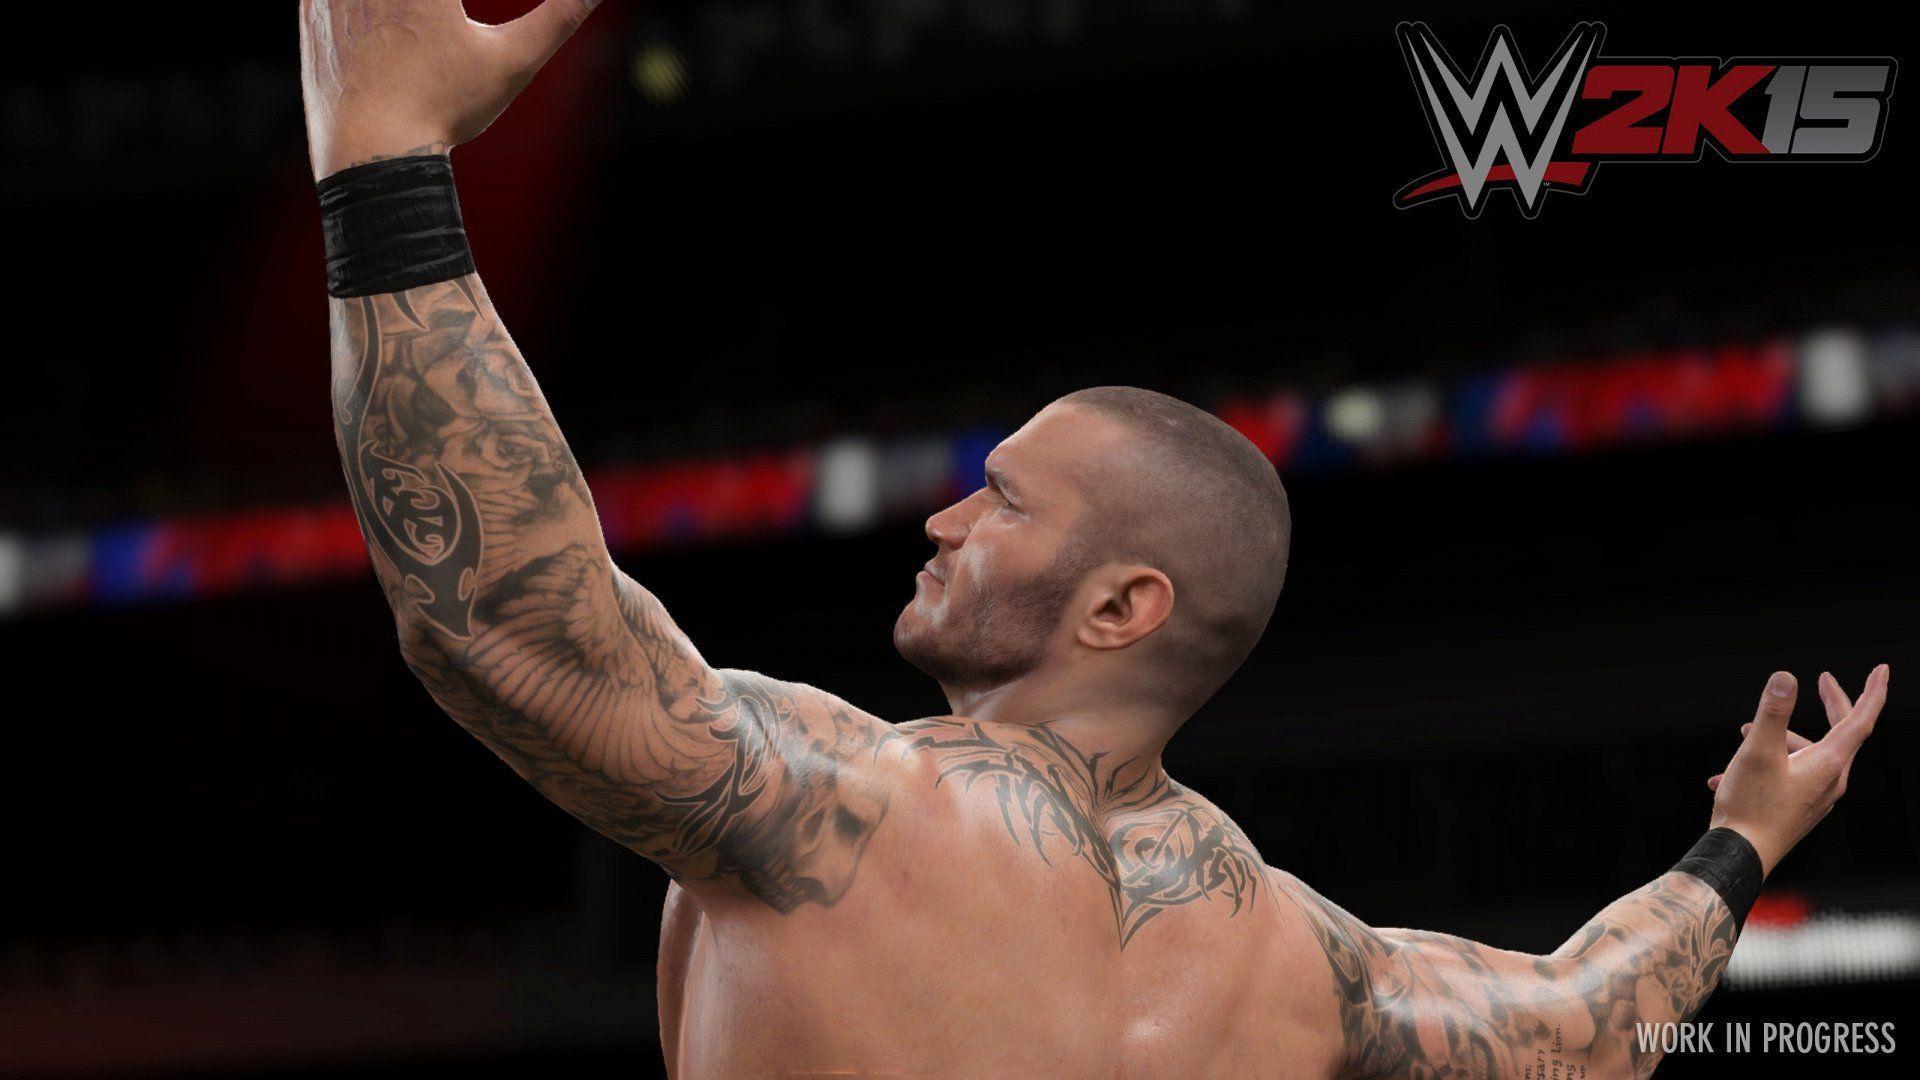 WWE 2K15: First In Game Shots Of Randy Orton Ready To Strike